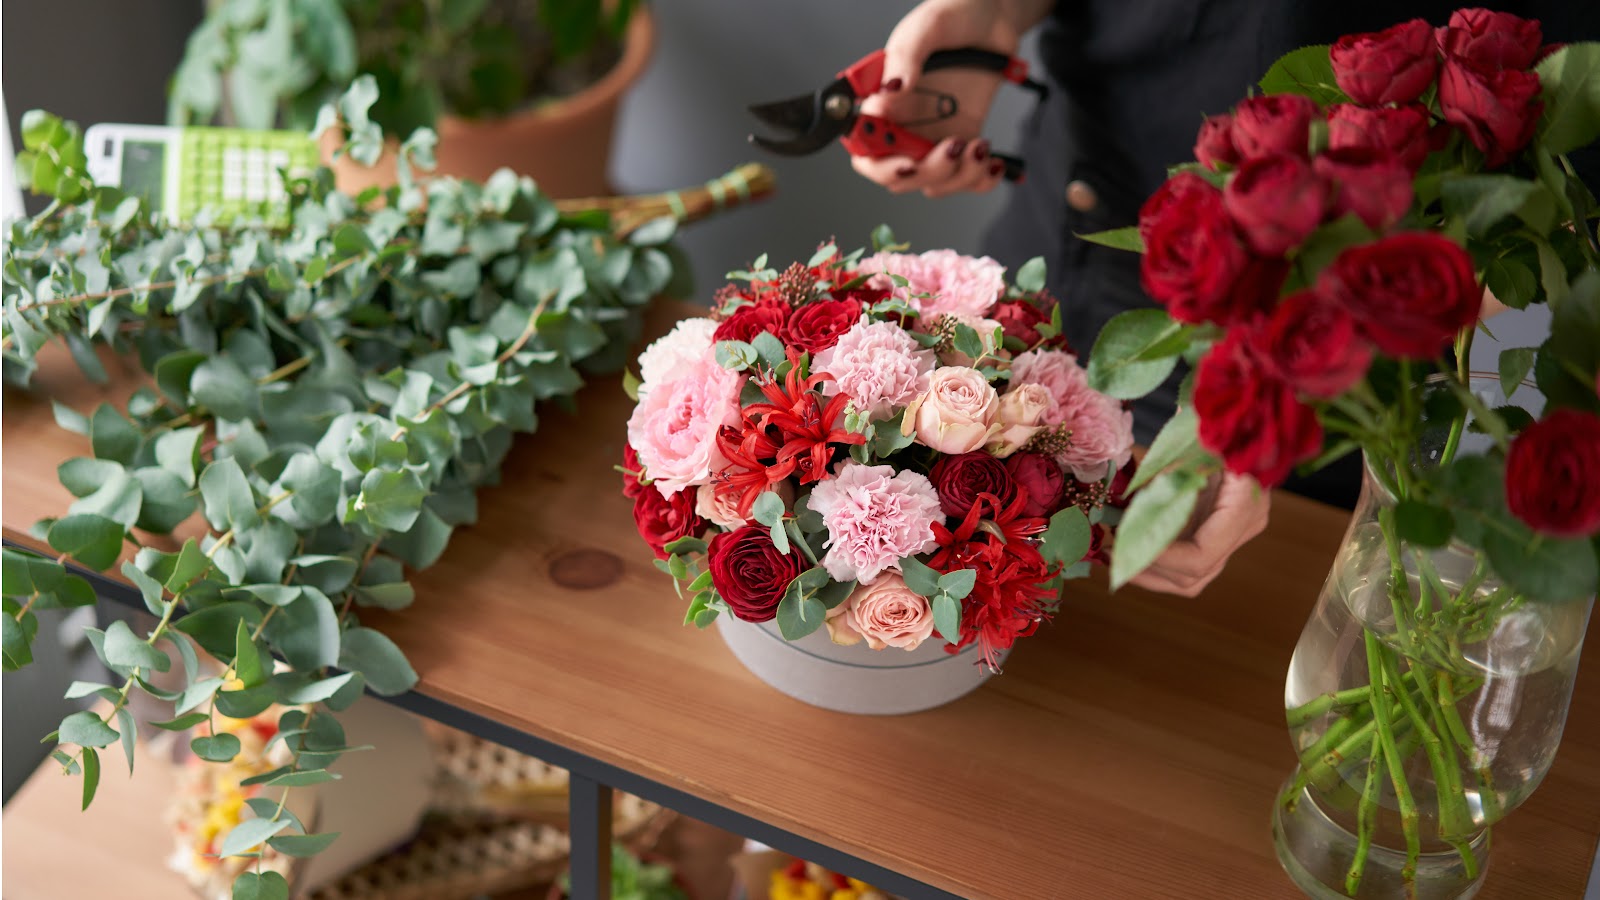 The 5 best flower delivery websites of 2021 for Mother's Day